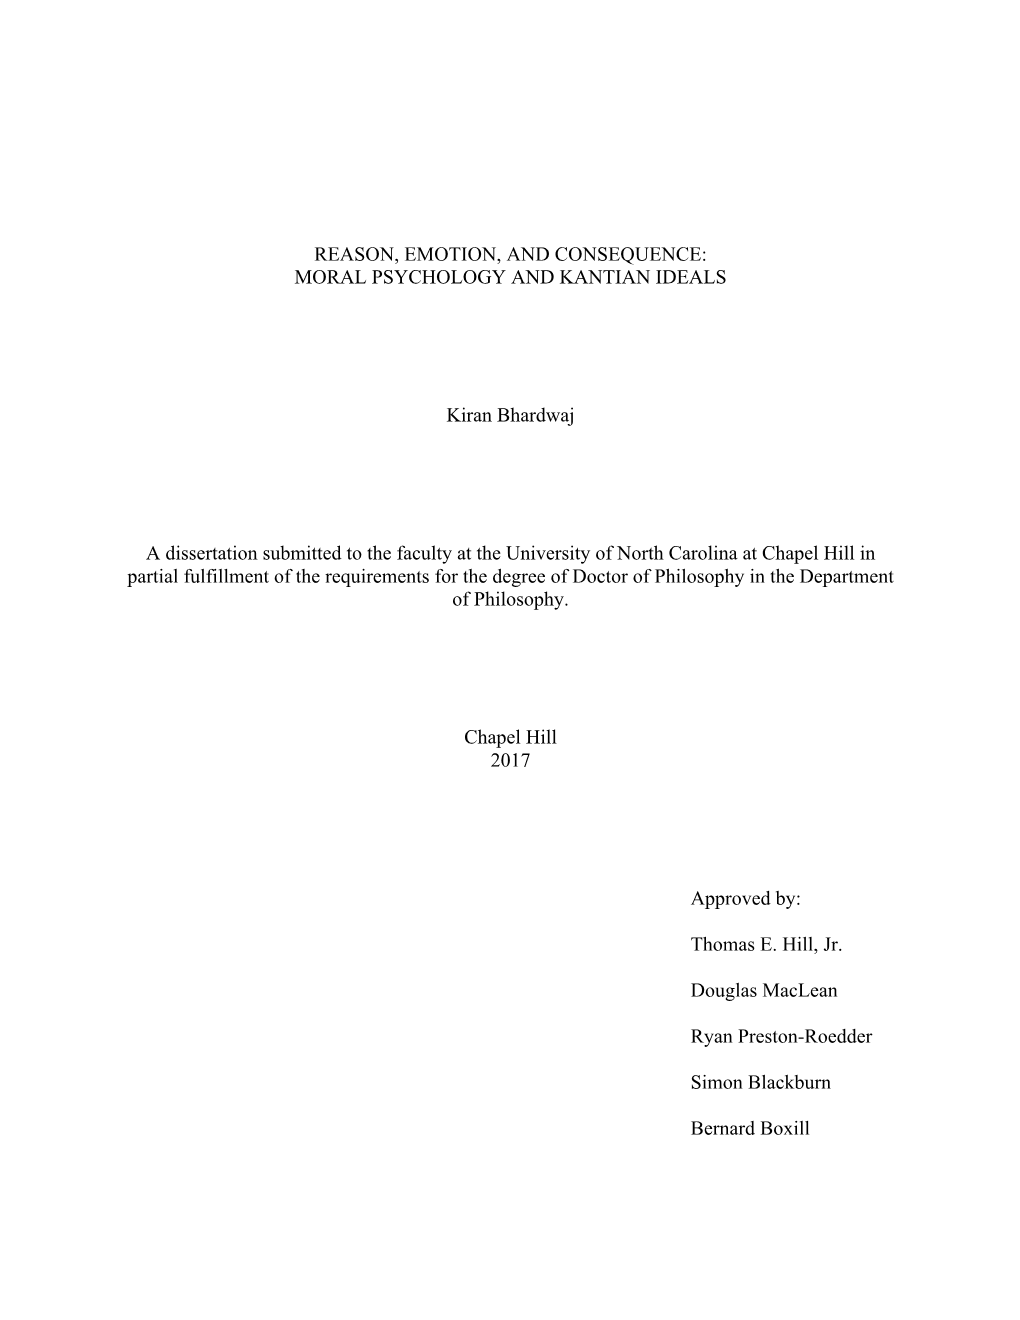 MORAL PSYCHOLOGY and KANTIAN IDEALS Kiran Bhardwaj a Dissertation Submitted to the Faculty At